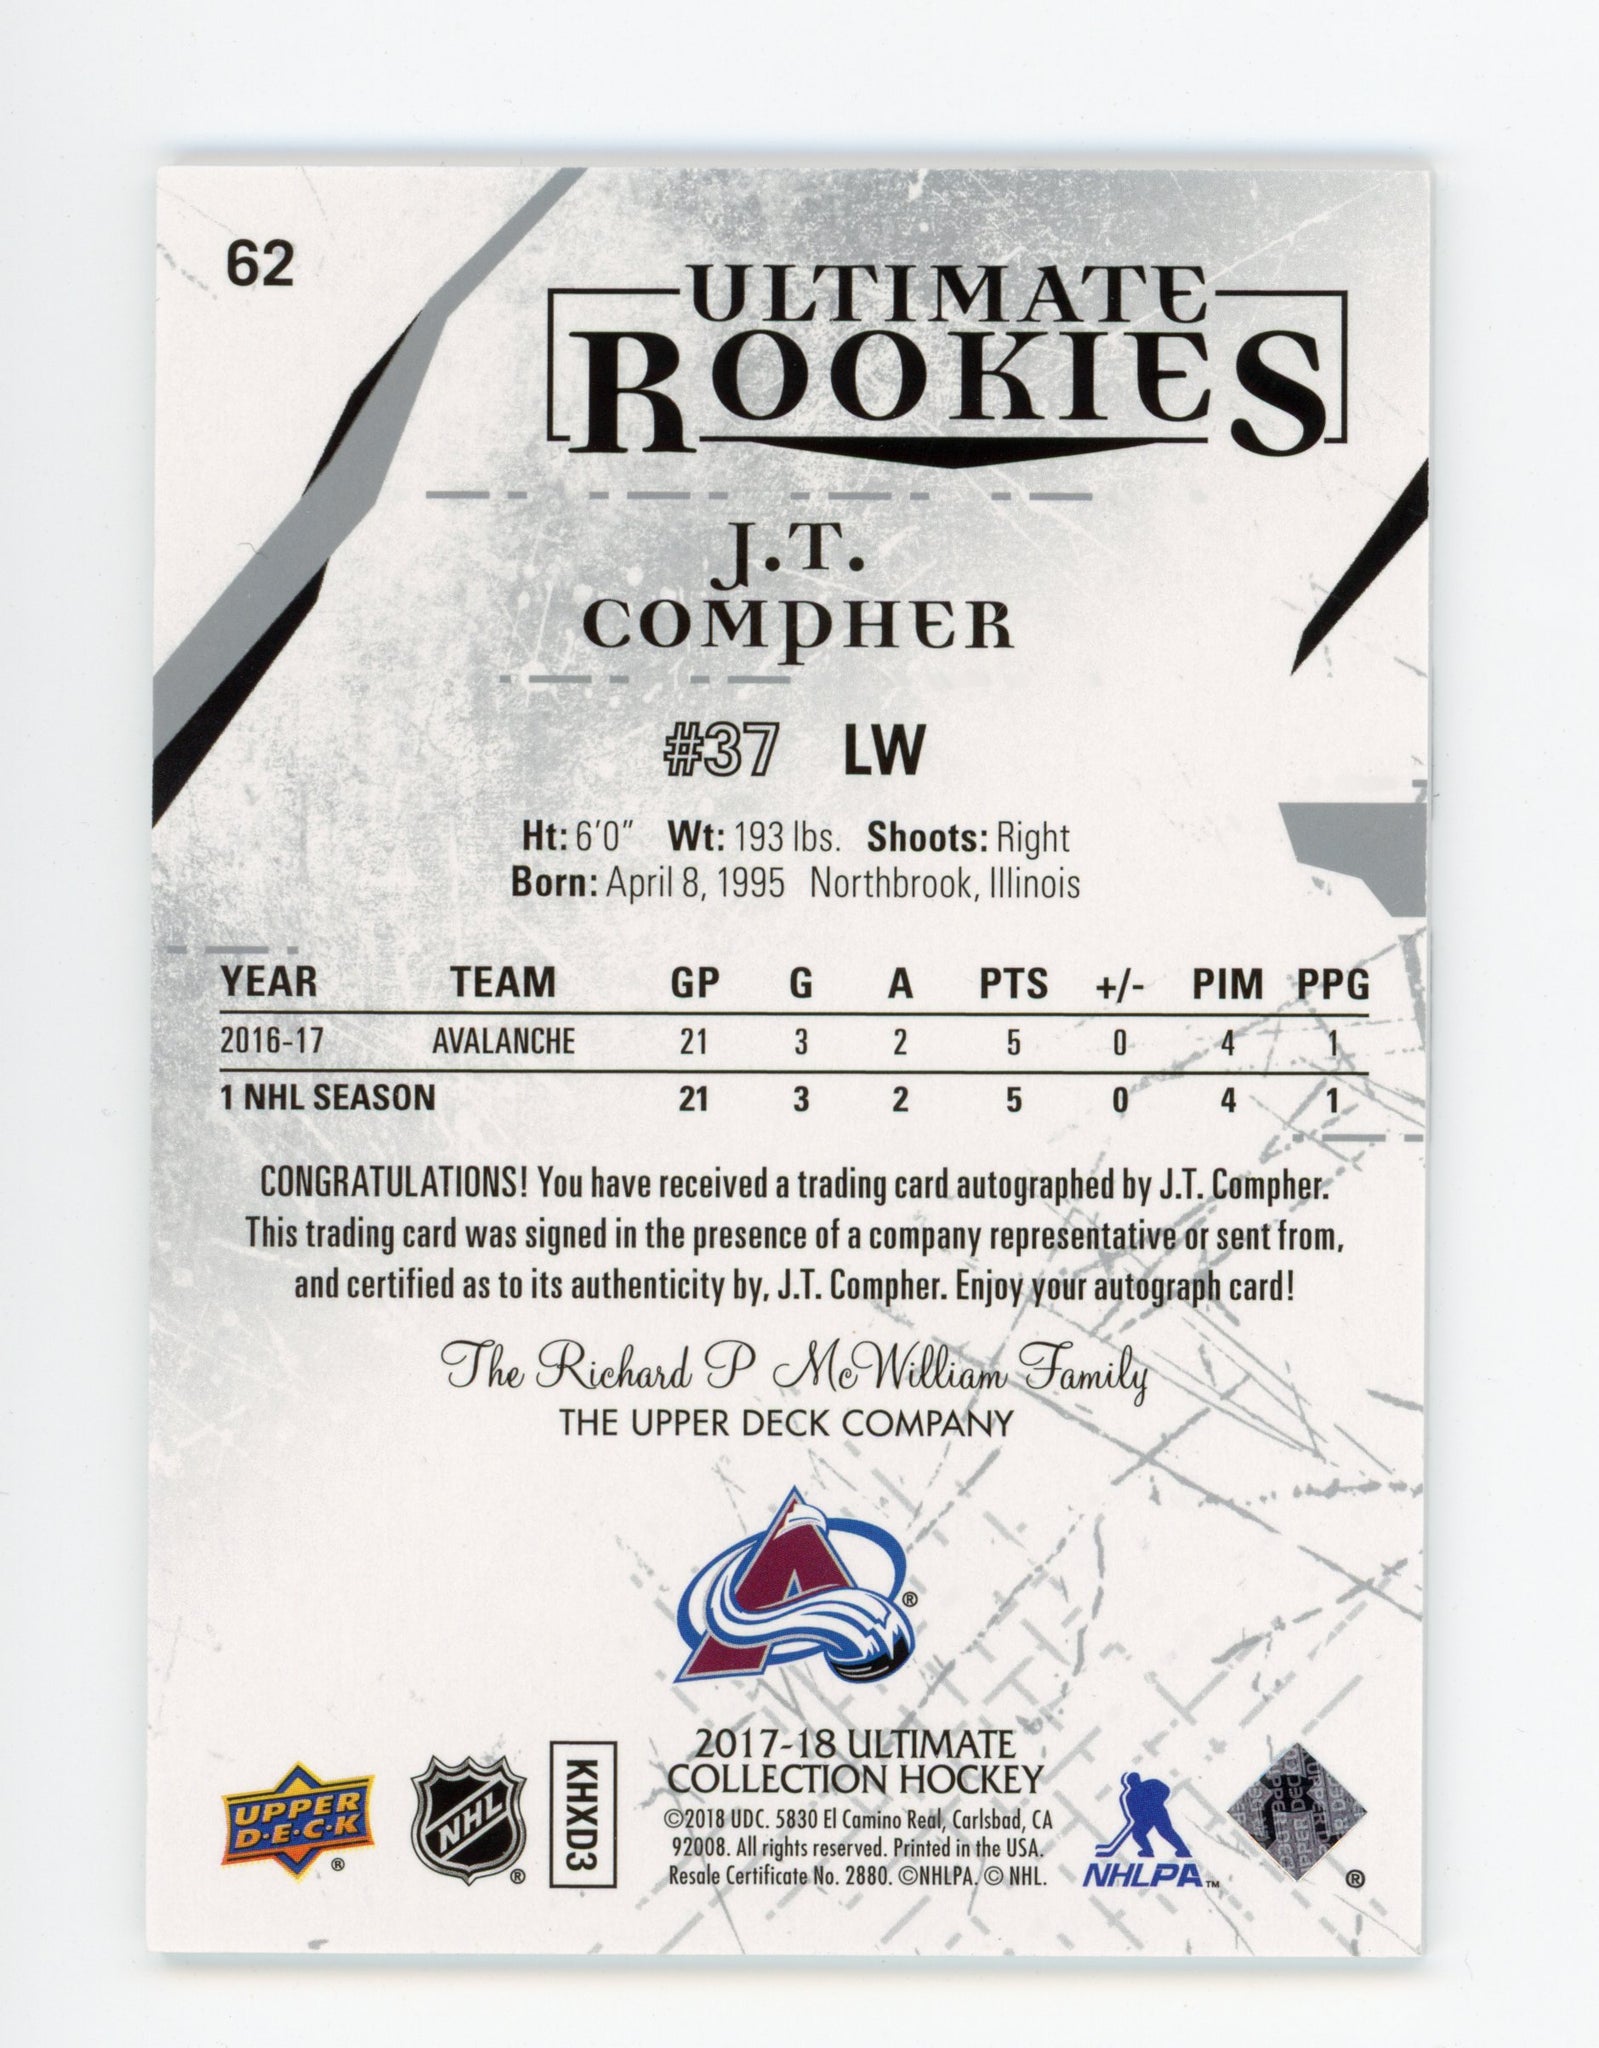 2017-2018 J.T. Compher Ultimate Rookies #d /399 Colorado Avalanche #62